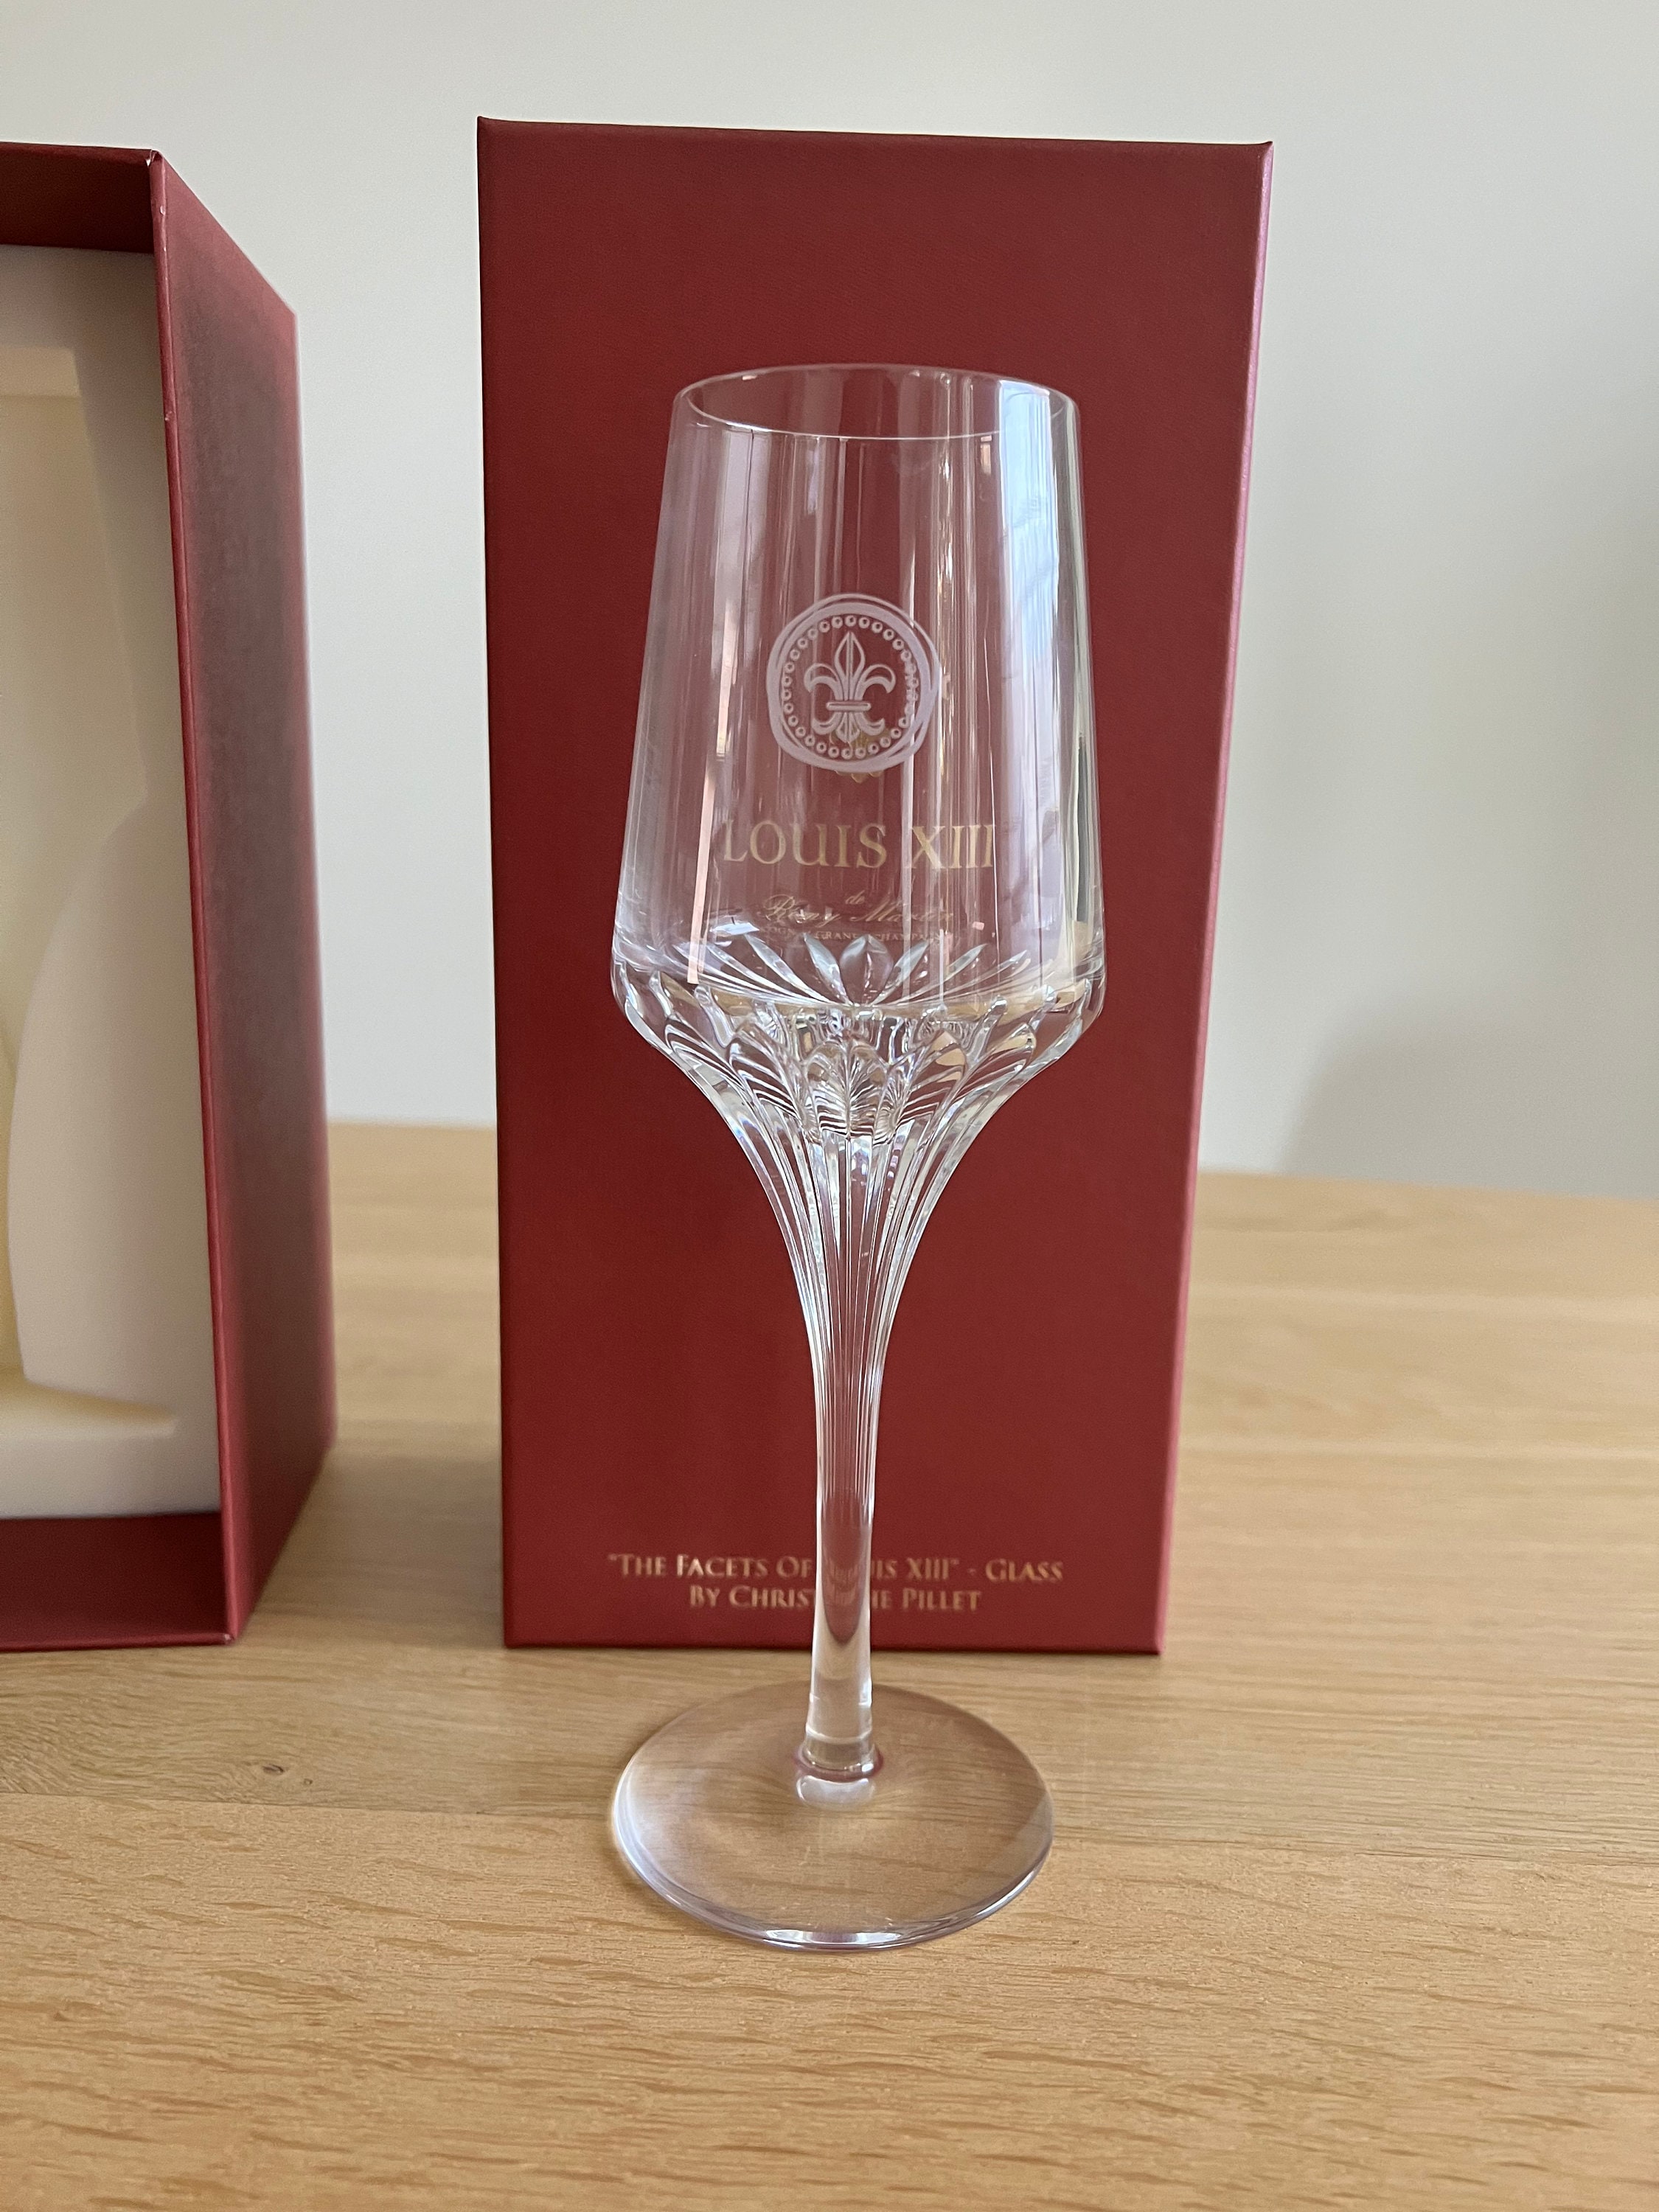 Rémy Martin - Set of 2 Louis XIII Crystal Glasses by Baccarat, as